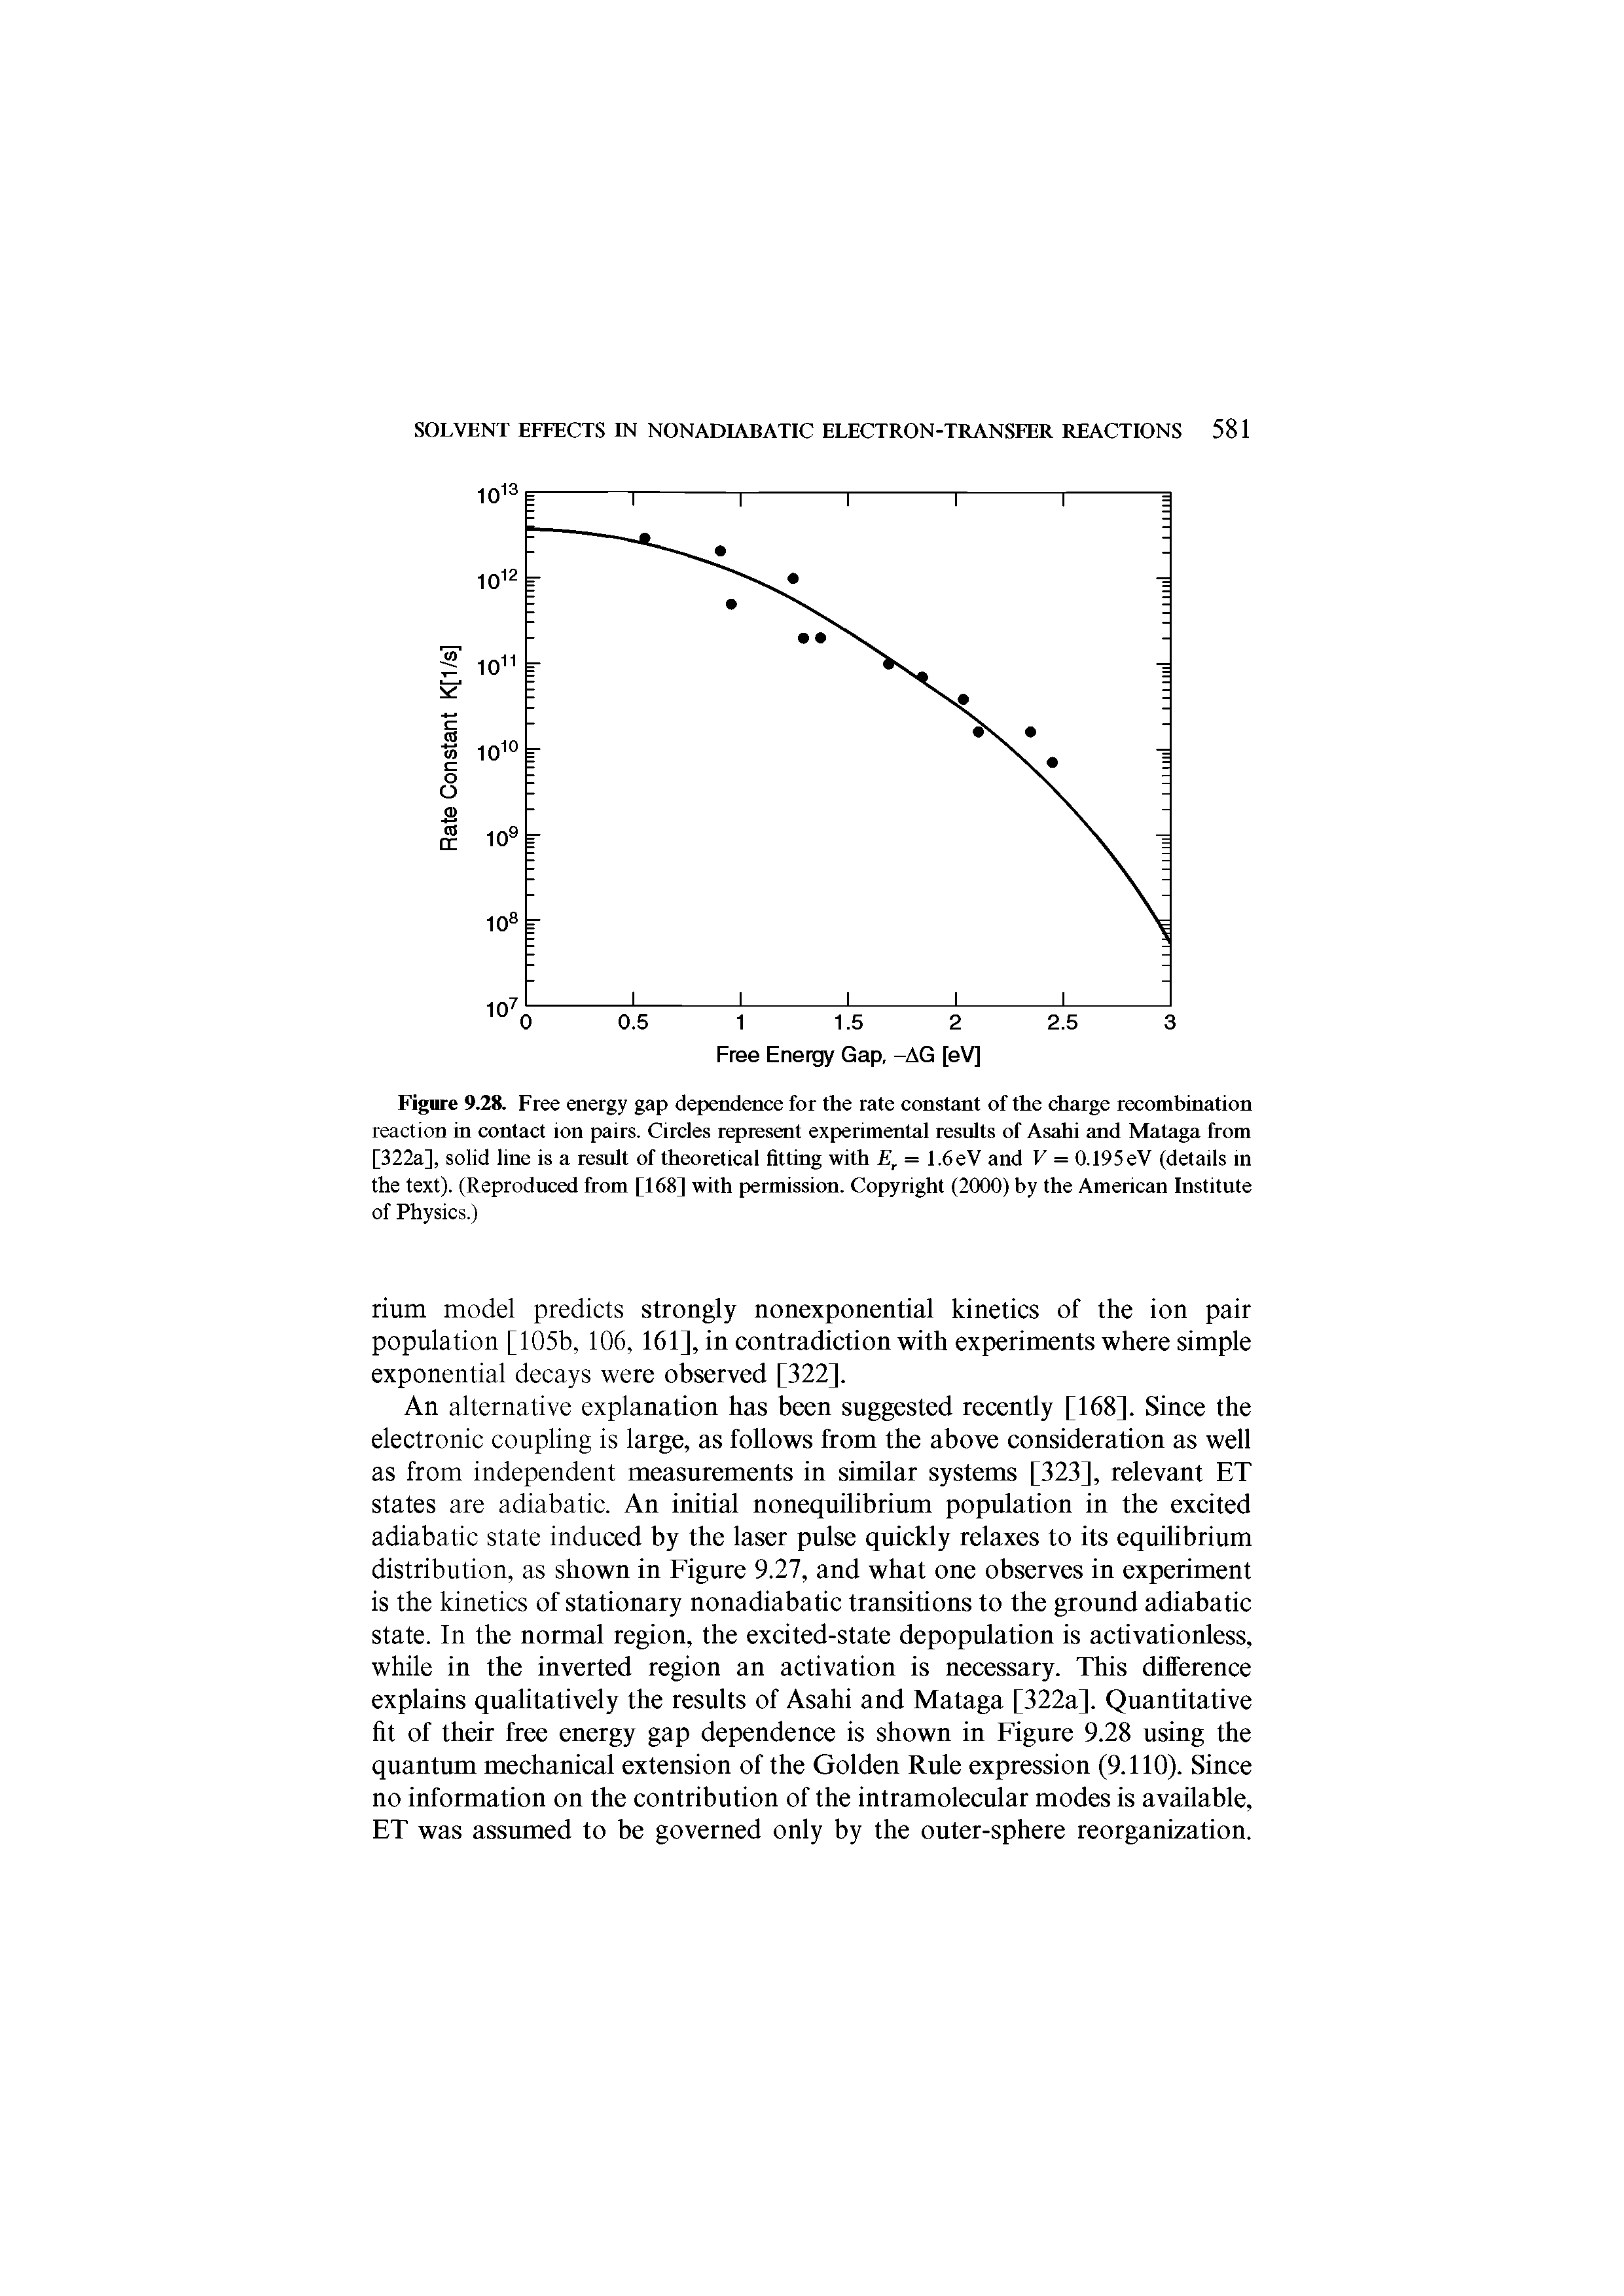 Figure 9.28. Free energy gap dependence for the rate constant of the charge recombination reaction in contact ion pairs. Circles represent experimental results of Asahi and Mataga from [322a], solid line is a result of theoretical fitting with , = I.6eV and V = O.I95eV (details in the text). (Reproduced from [168] with permission. Copyright (2000) by the American Institute...